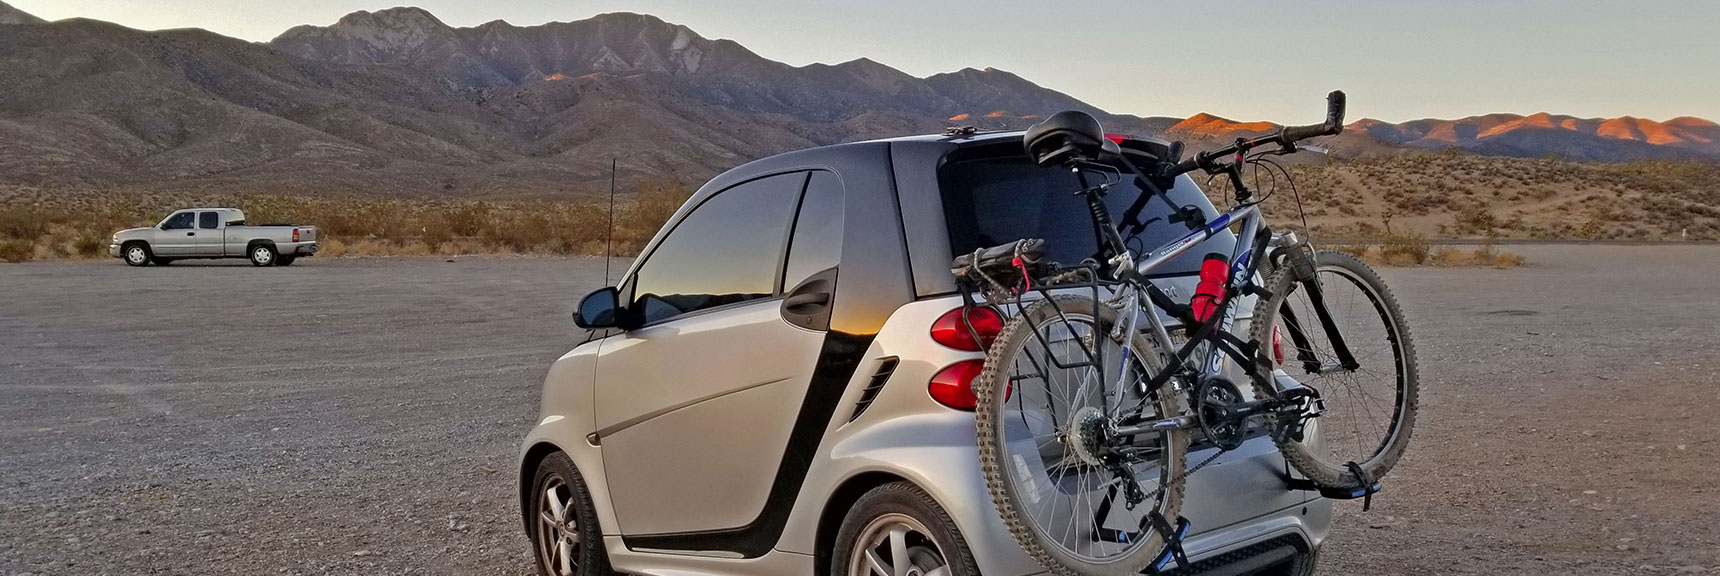 The Bike is About the Same Size as the Car! Kyle Canyon & Harris Springs Rd, La Madre Mt Destination in Background | La Madre Mountain,, El Padre Mountain, Burnt Peak | La Madre Mountains Wilderness, Nevada